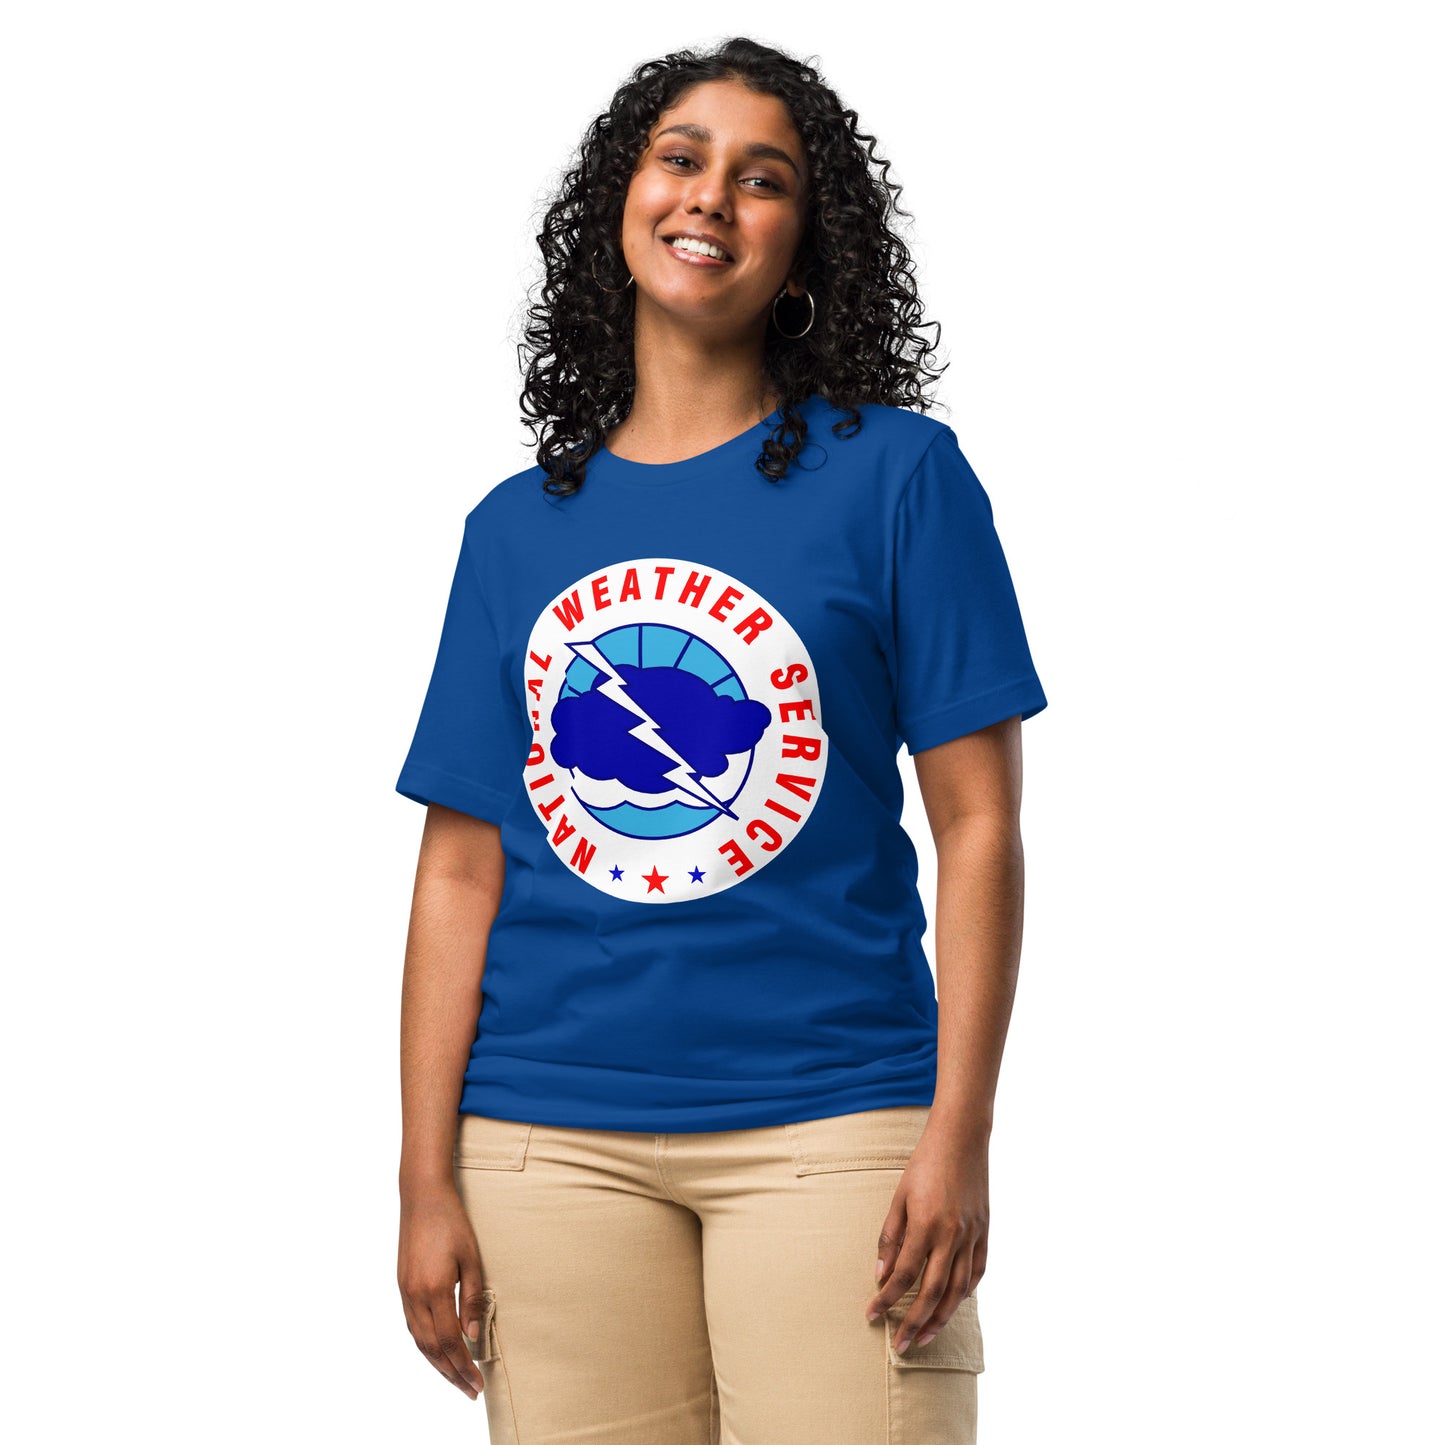 NWS Unisex t-shirt - Made in the USA!